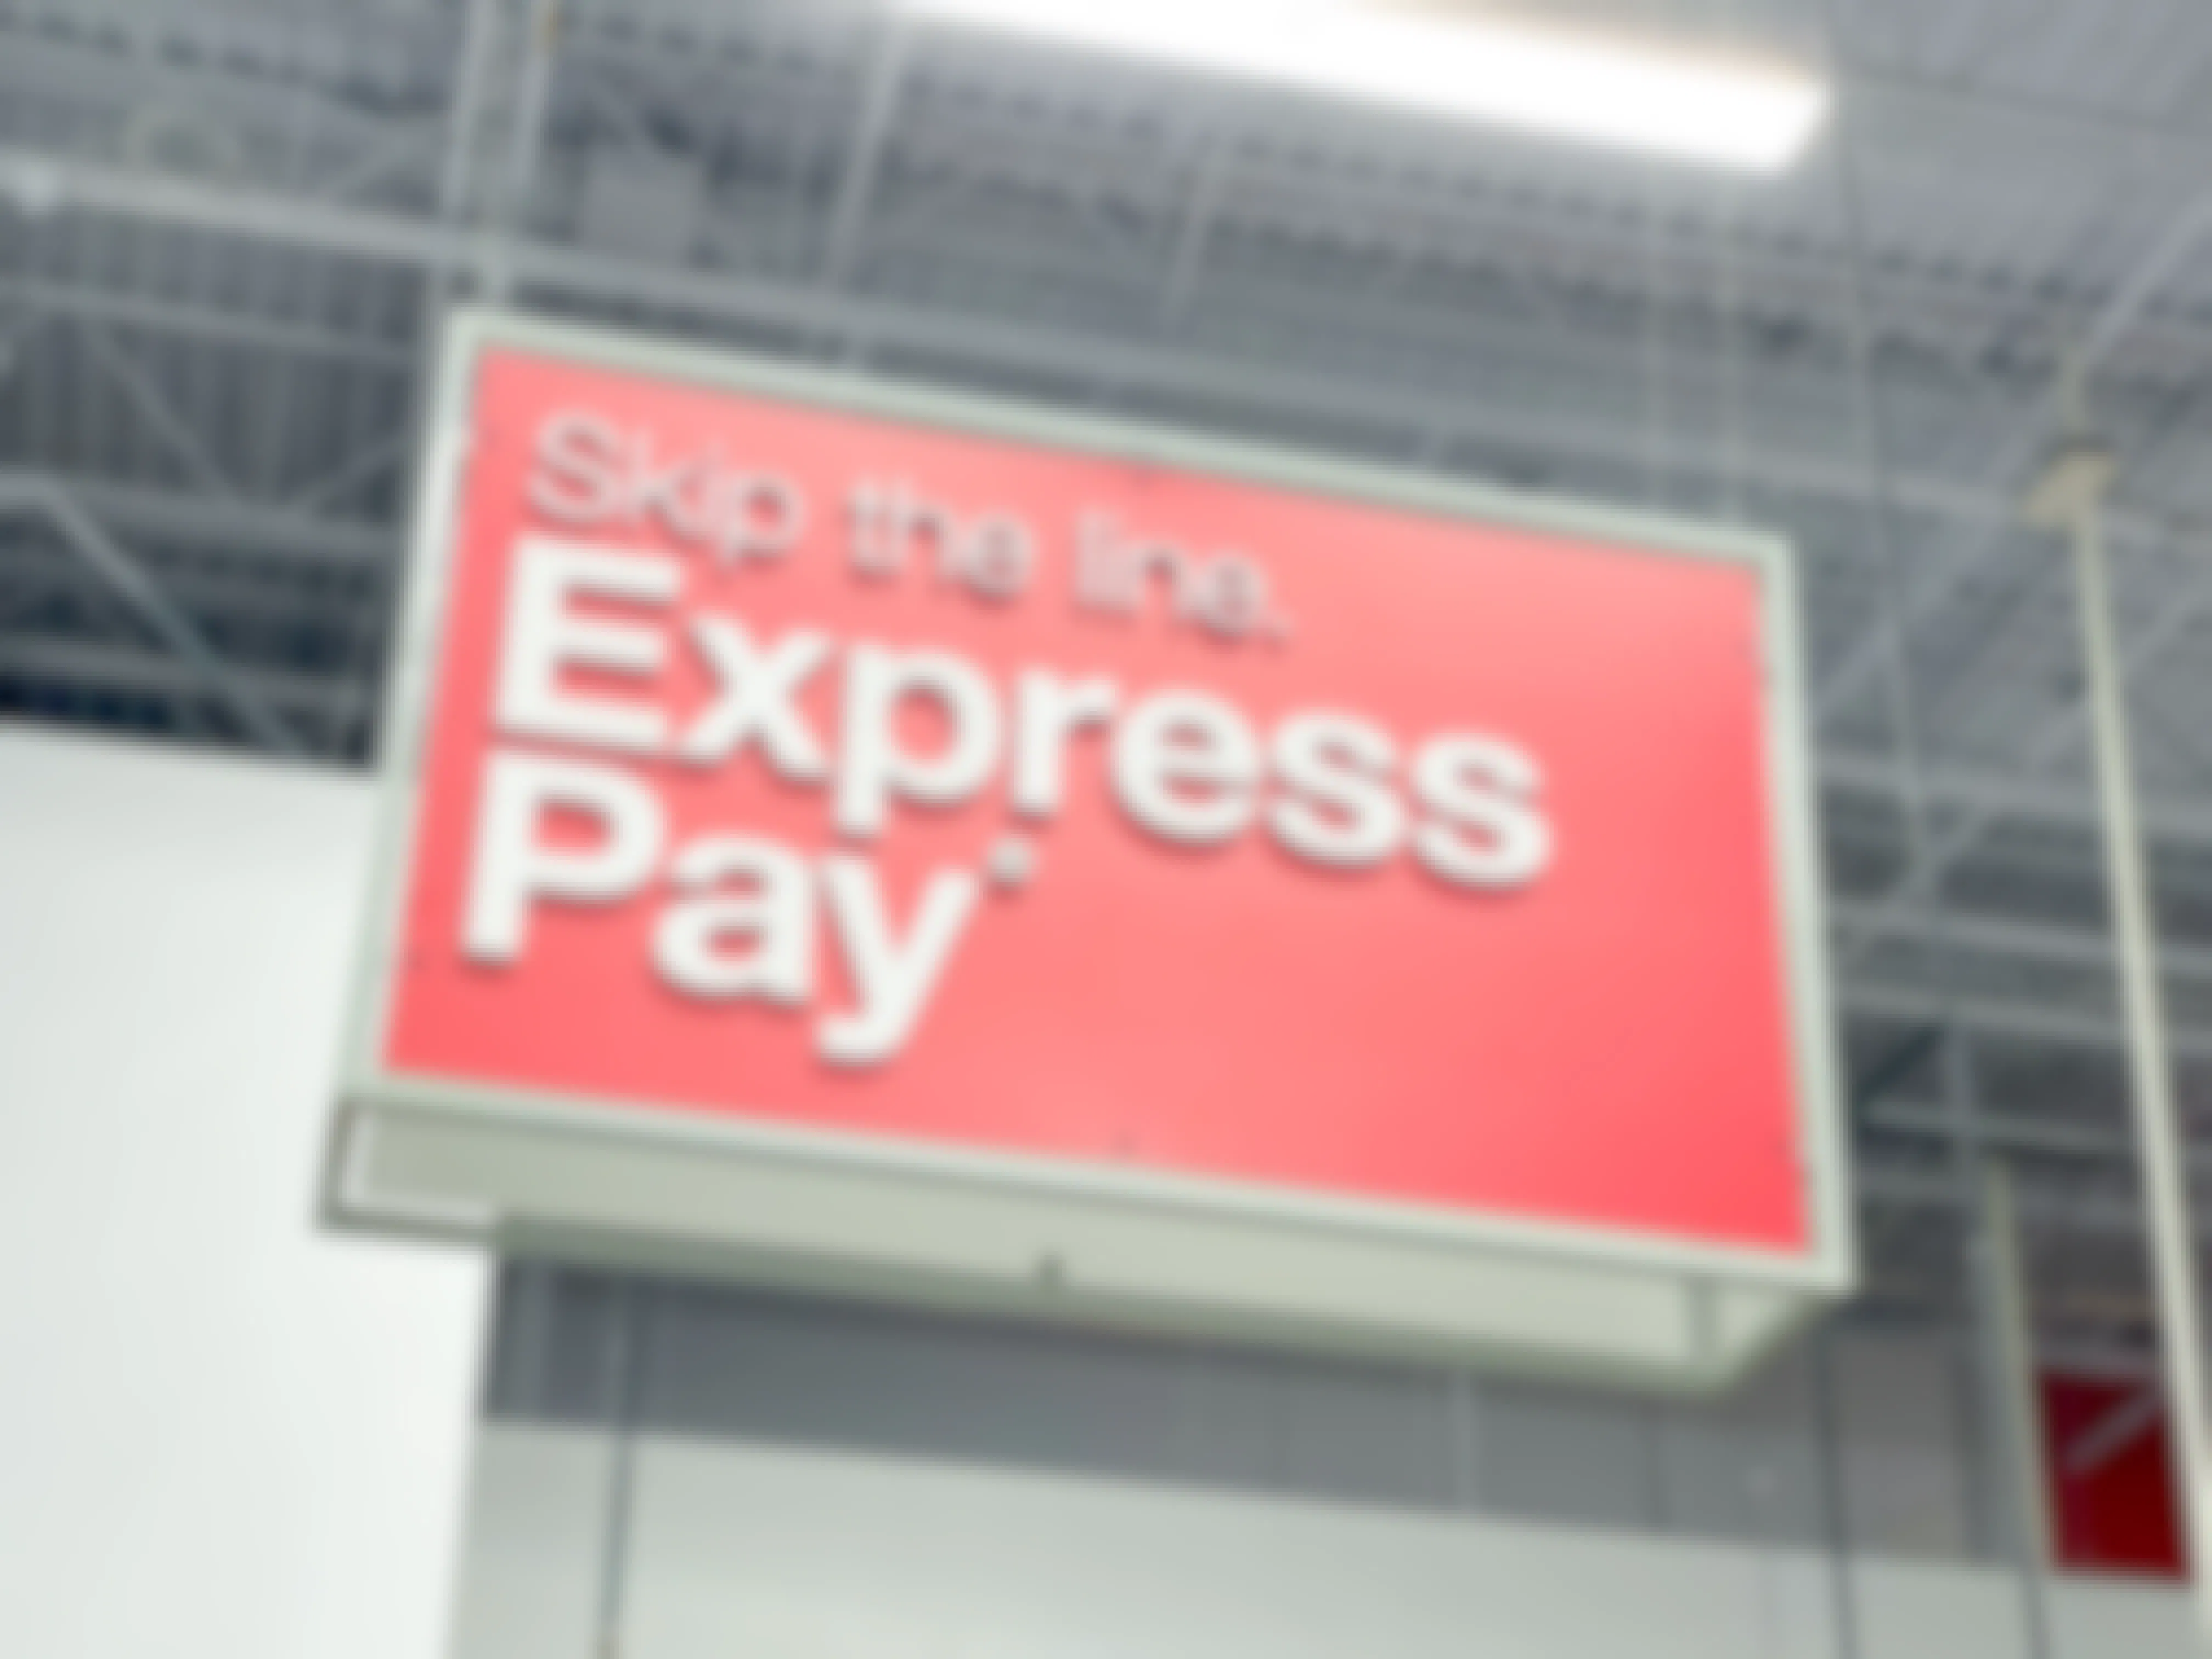 Express pay signage in red